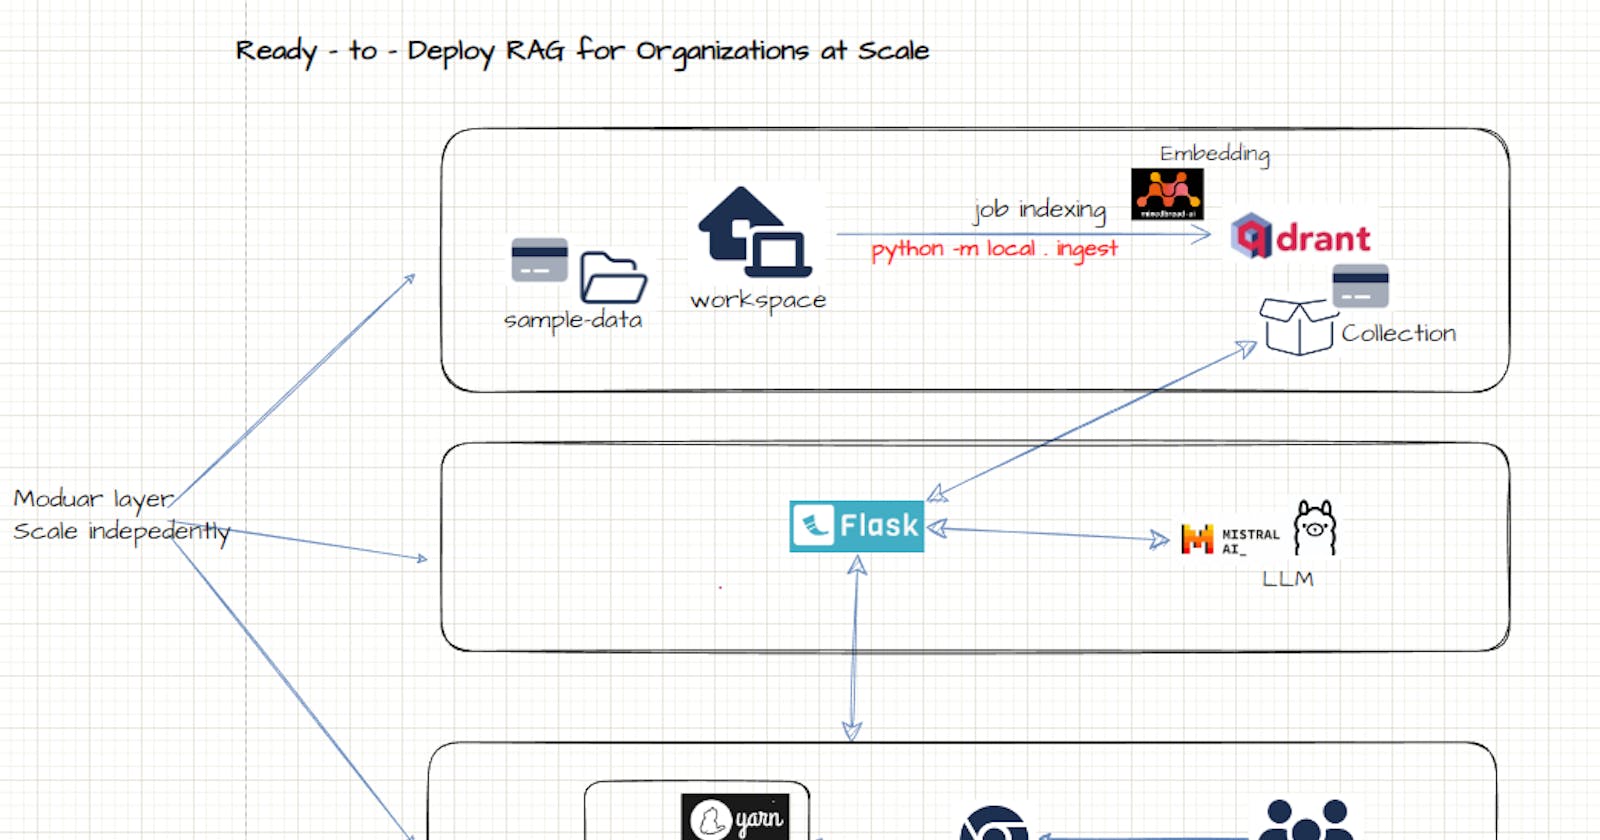 RAG Redefined: Ready-to-Deploy RAG for Organizations at Scale